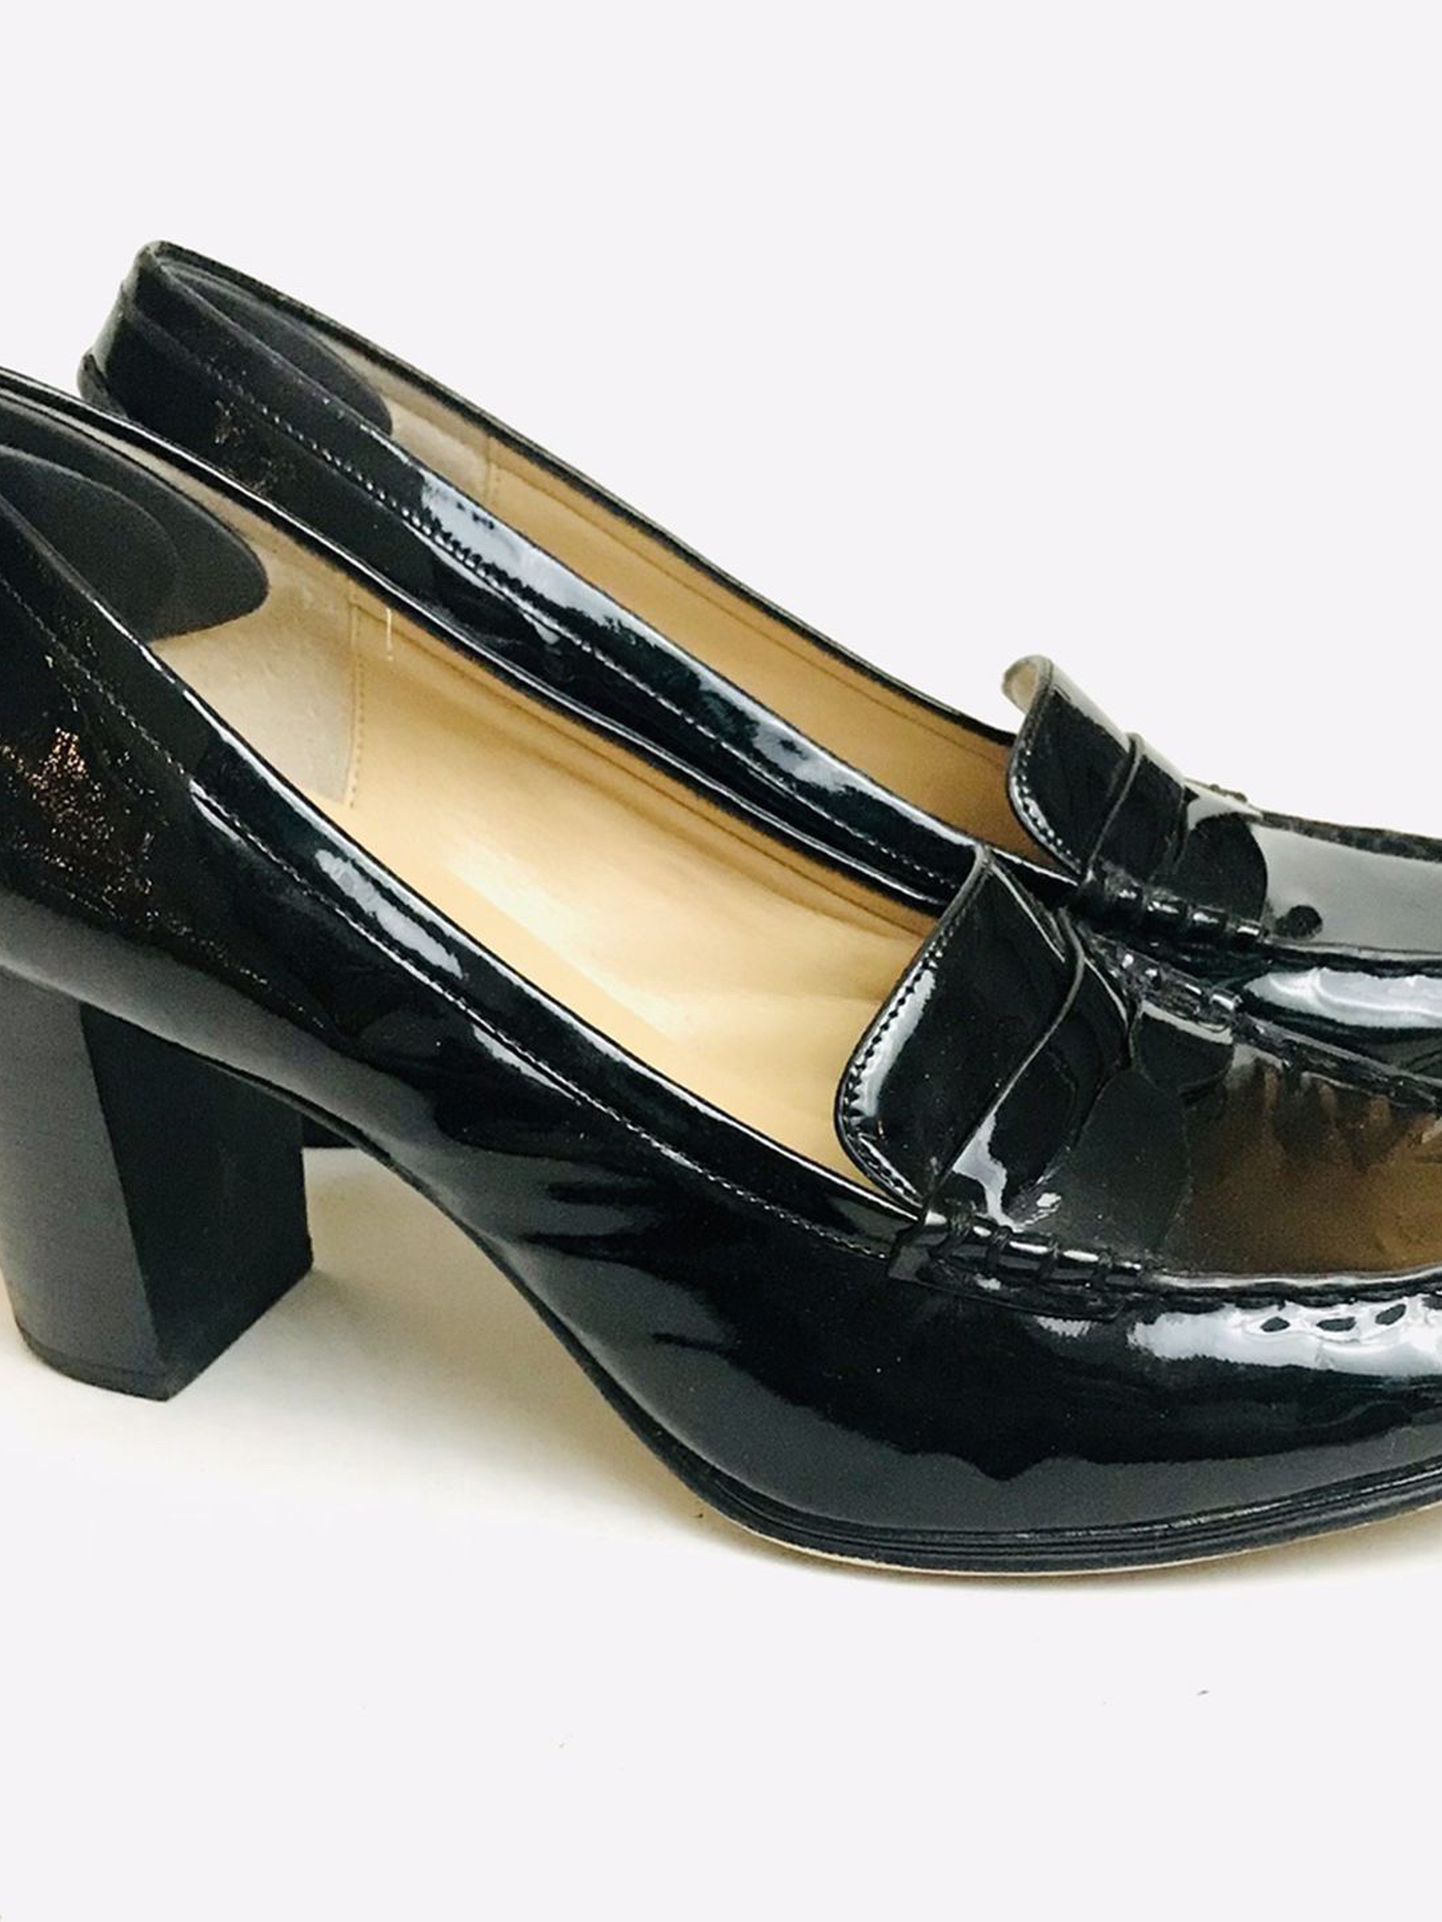 Michael Kors Bayville Penny Loafers - Size 10